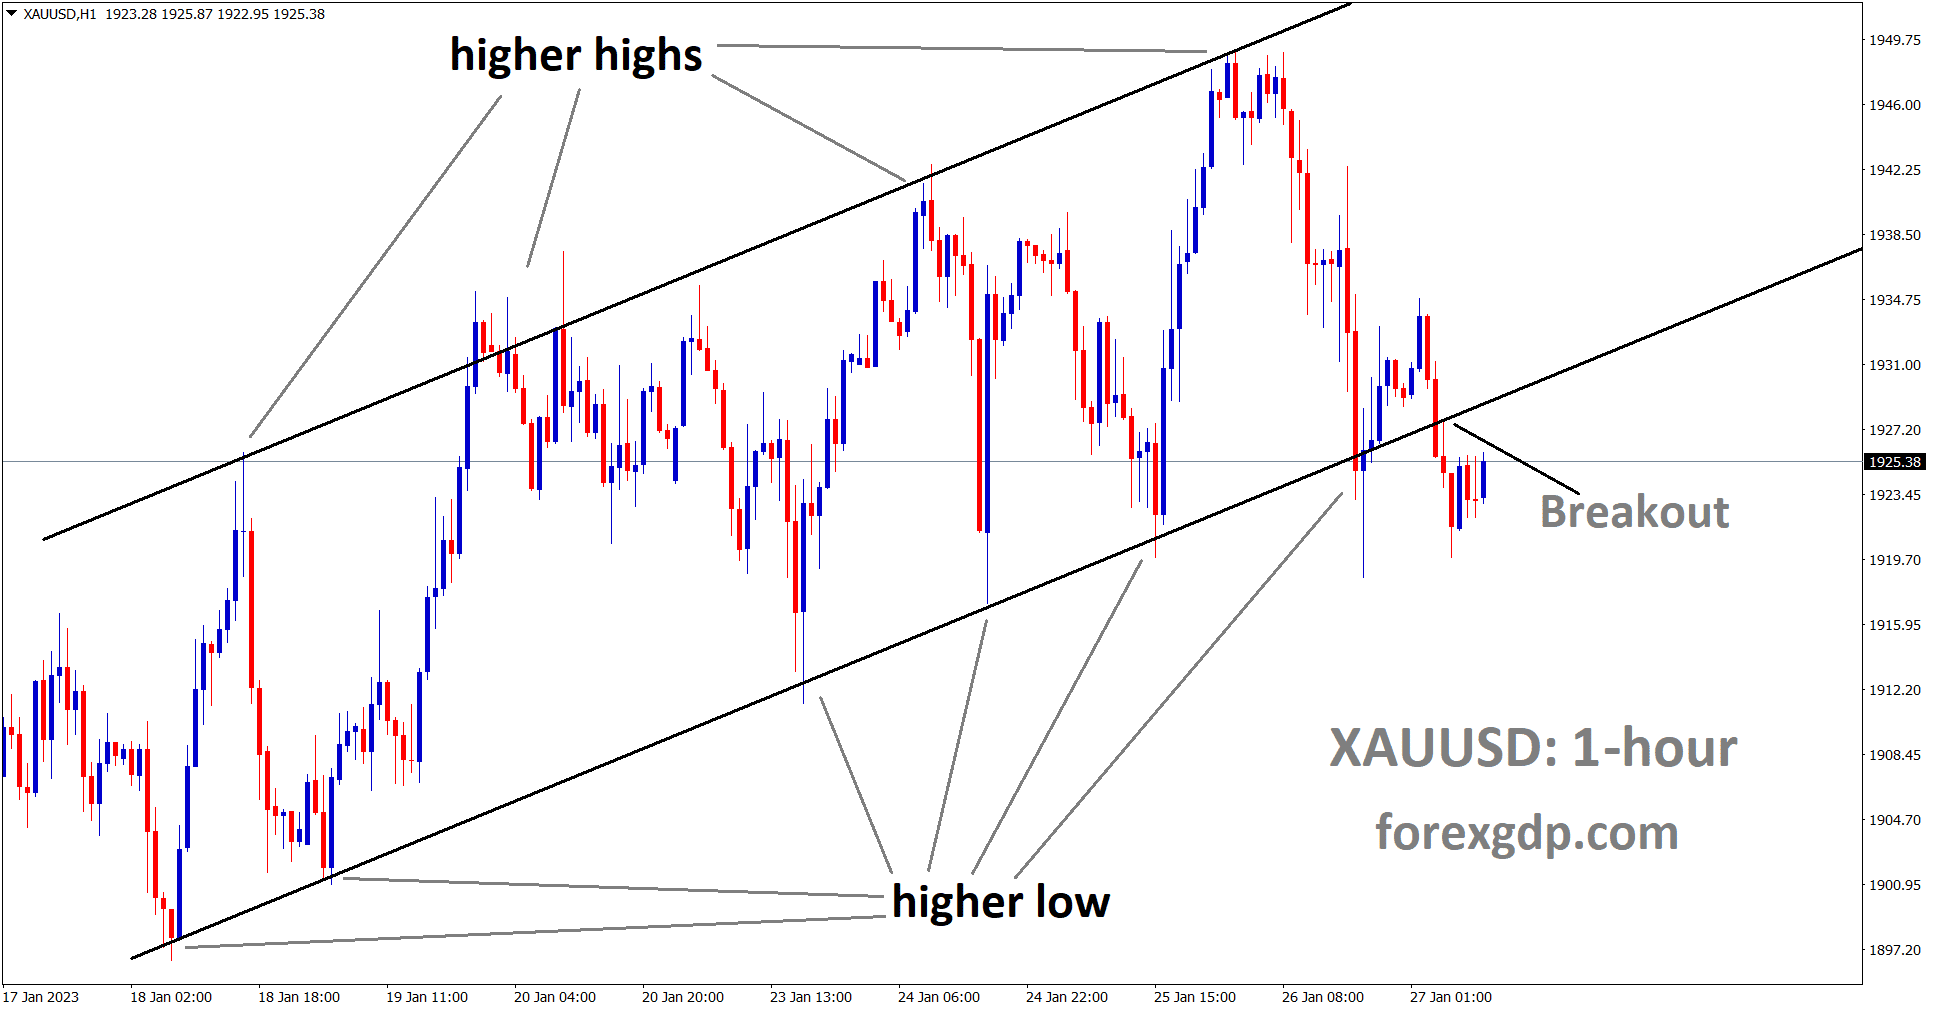 XAUUSD is moving in a Ascending channel and the market has broken the higher low area of the channel.